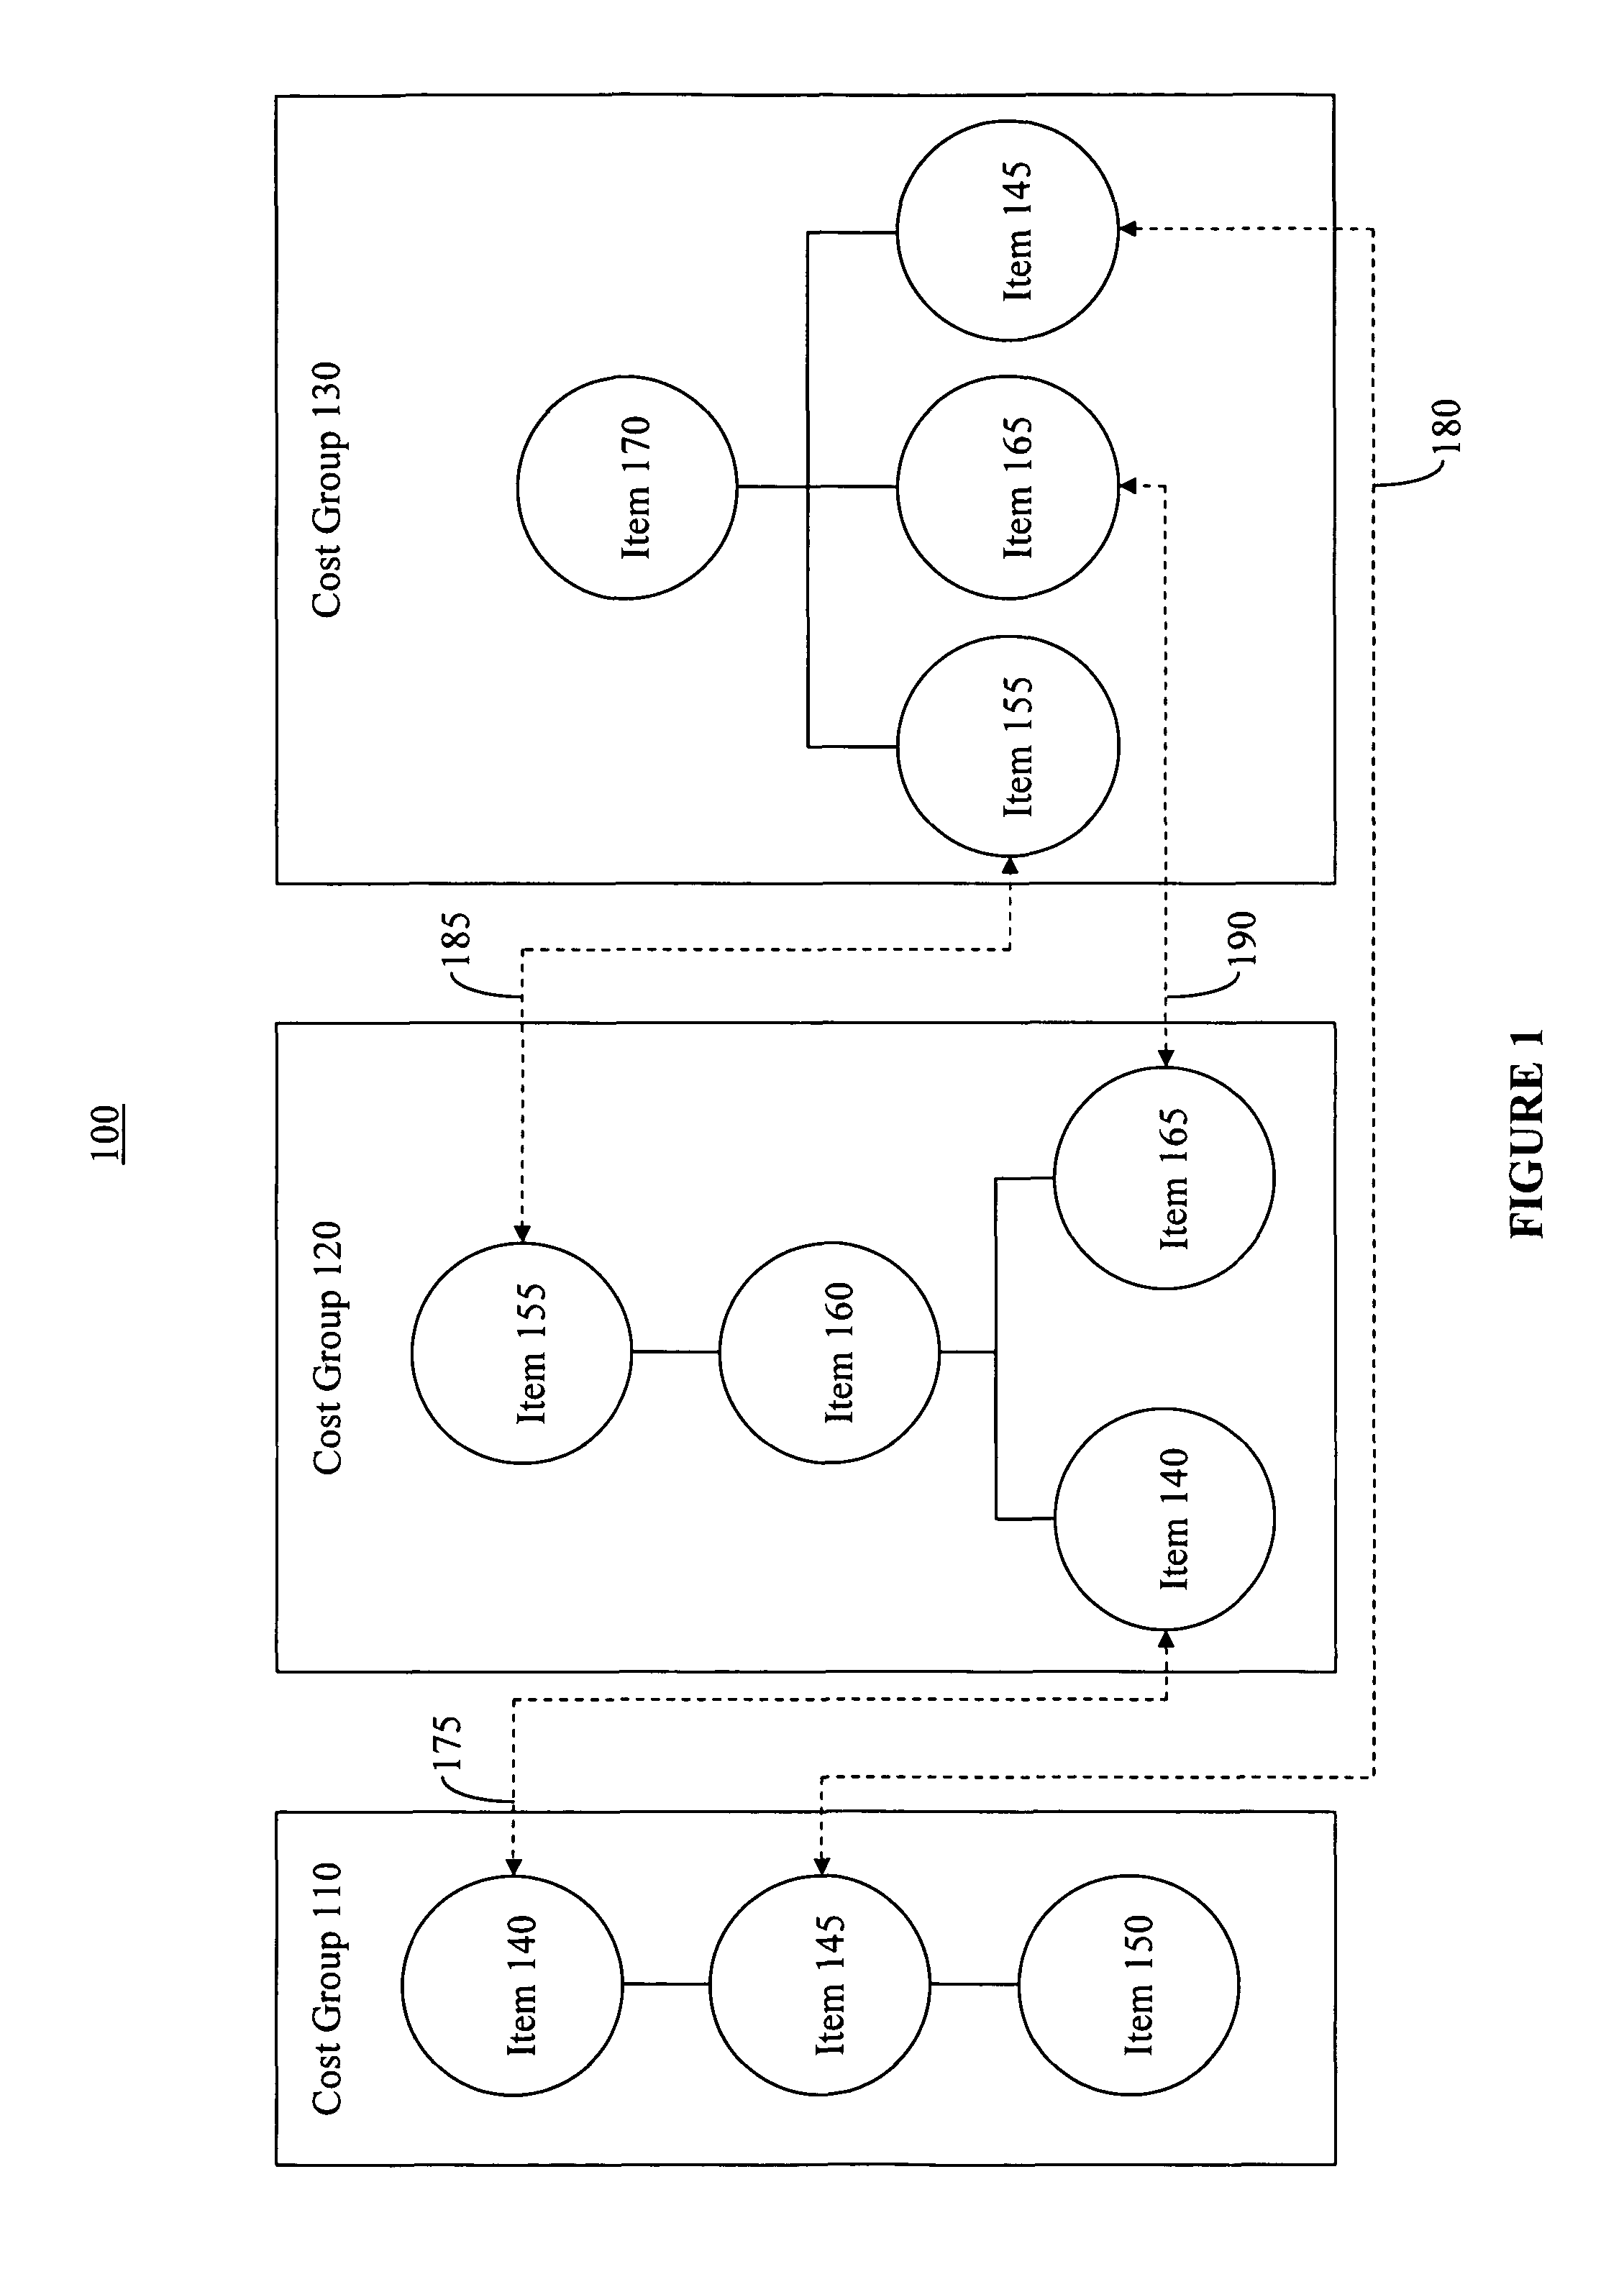 Method and system for determining absorption costing sequences for items in a business operation